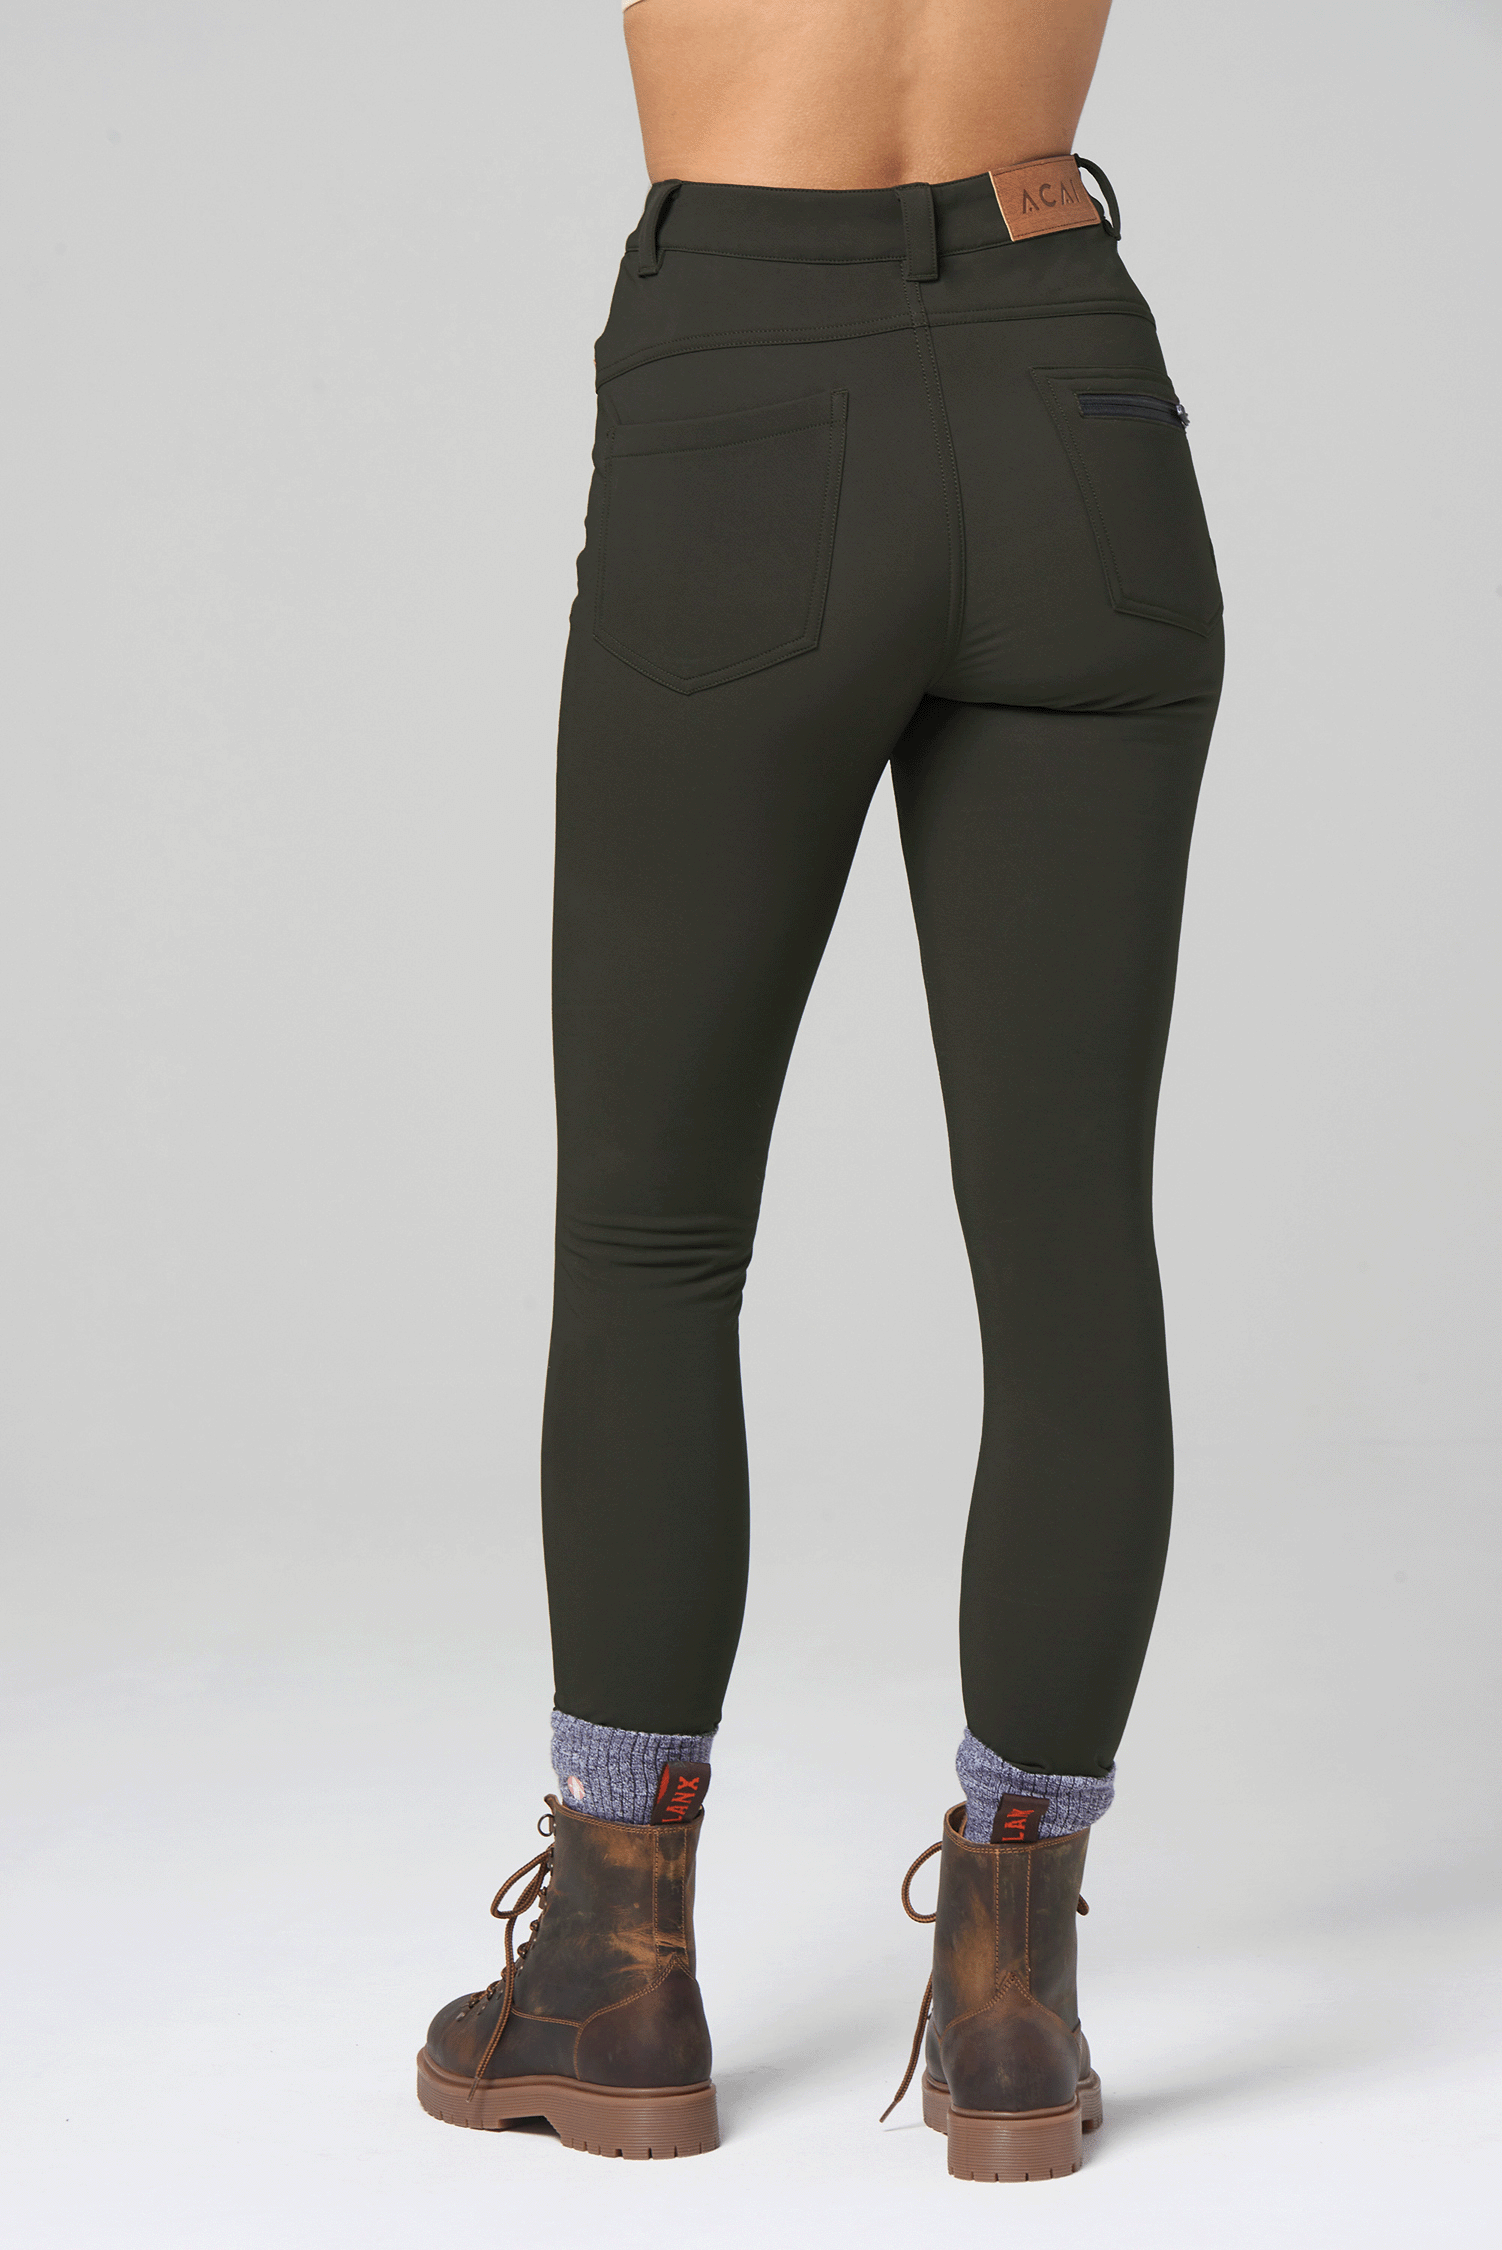 Thermal Skinny Outdoor Trousers - Espresso Trousers  